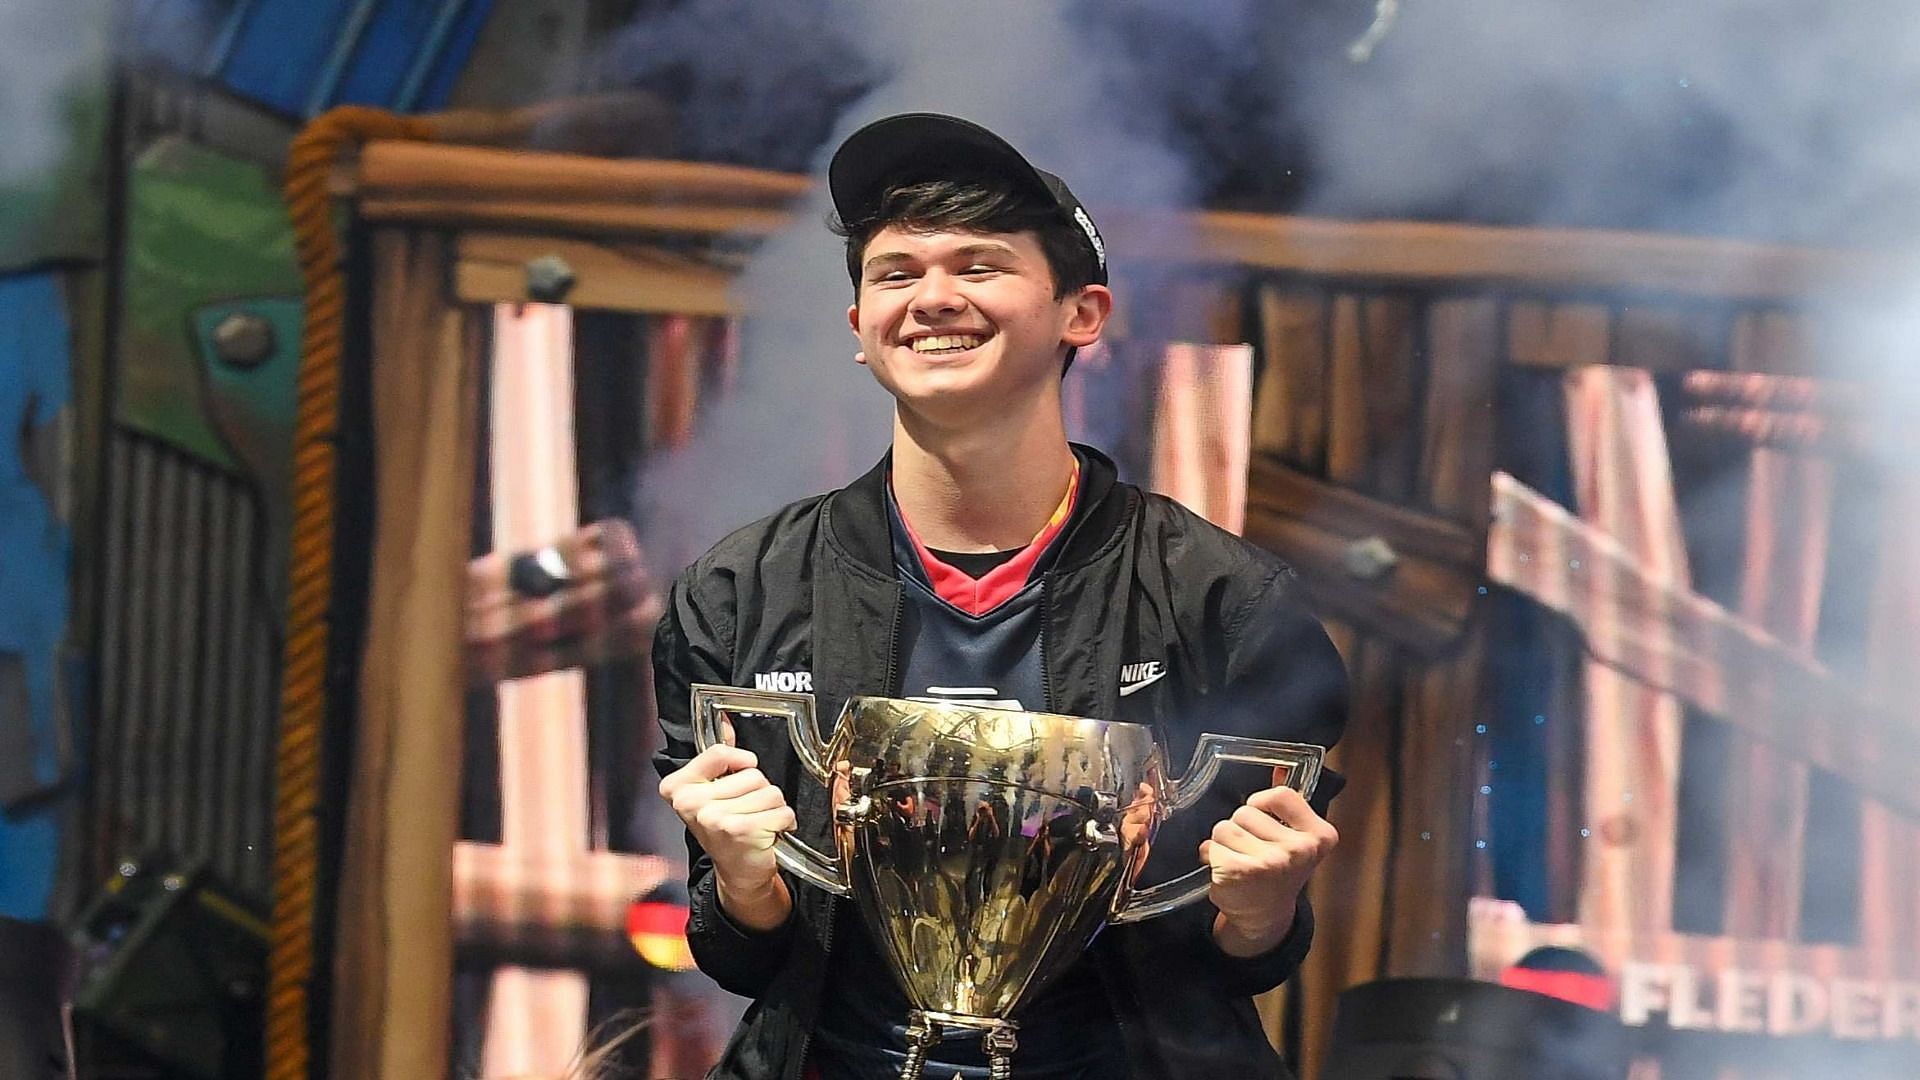 16-year-old Kyle Giersdorf after his victory at the Fortnite World Cup 2019 (Image via Fortnite World Cup)